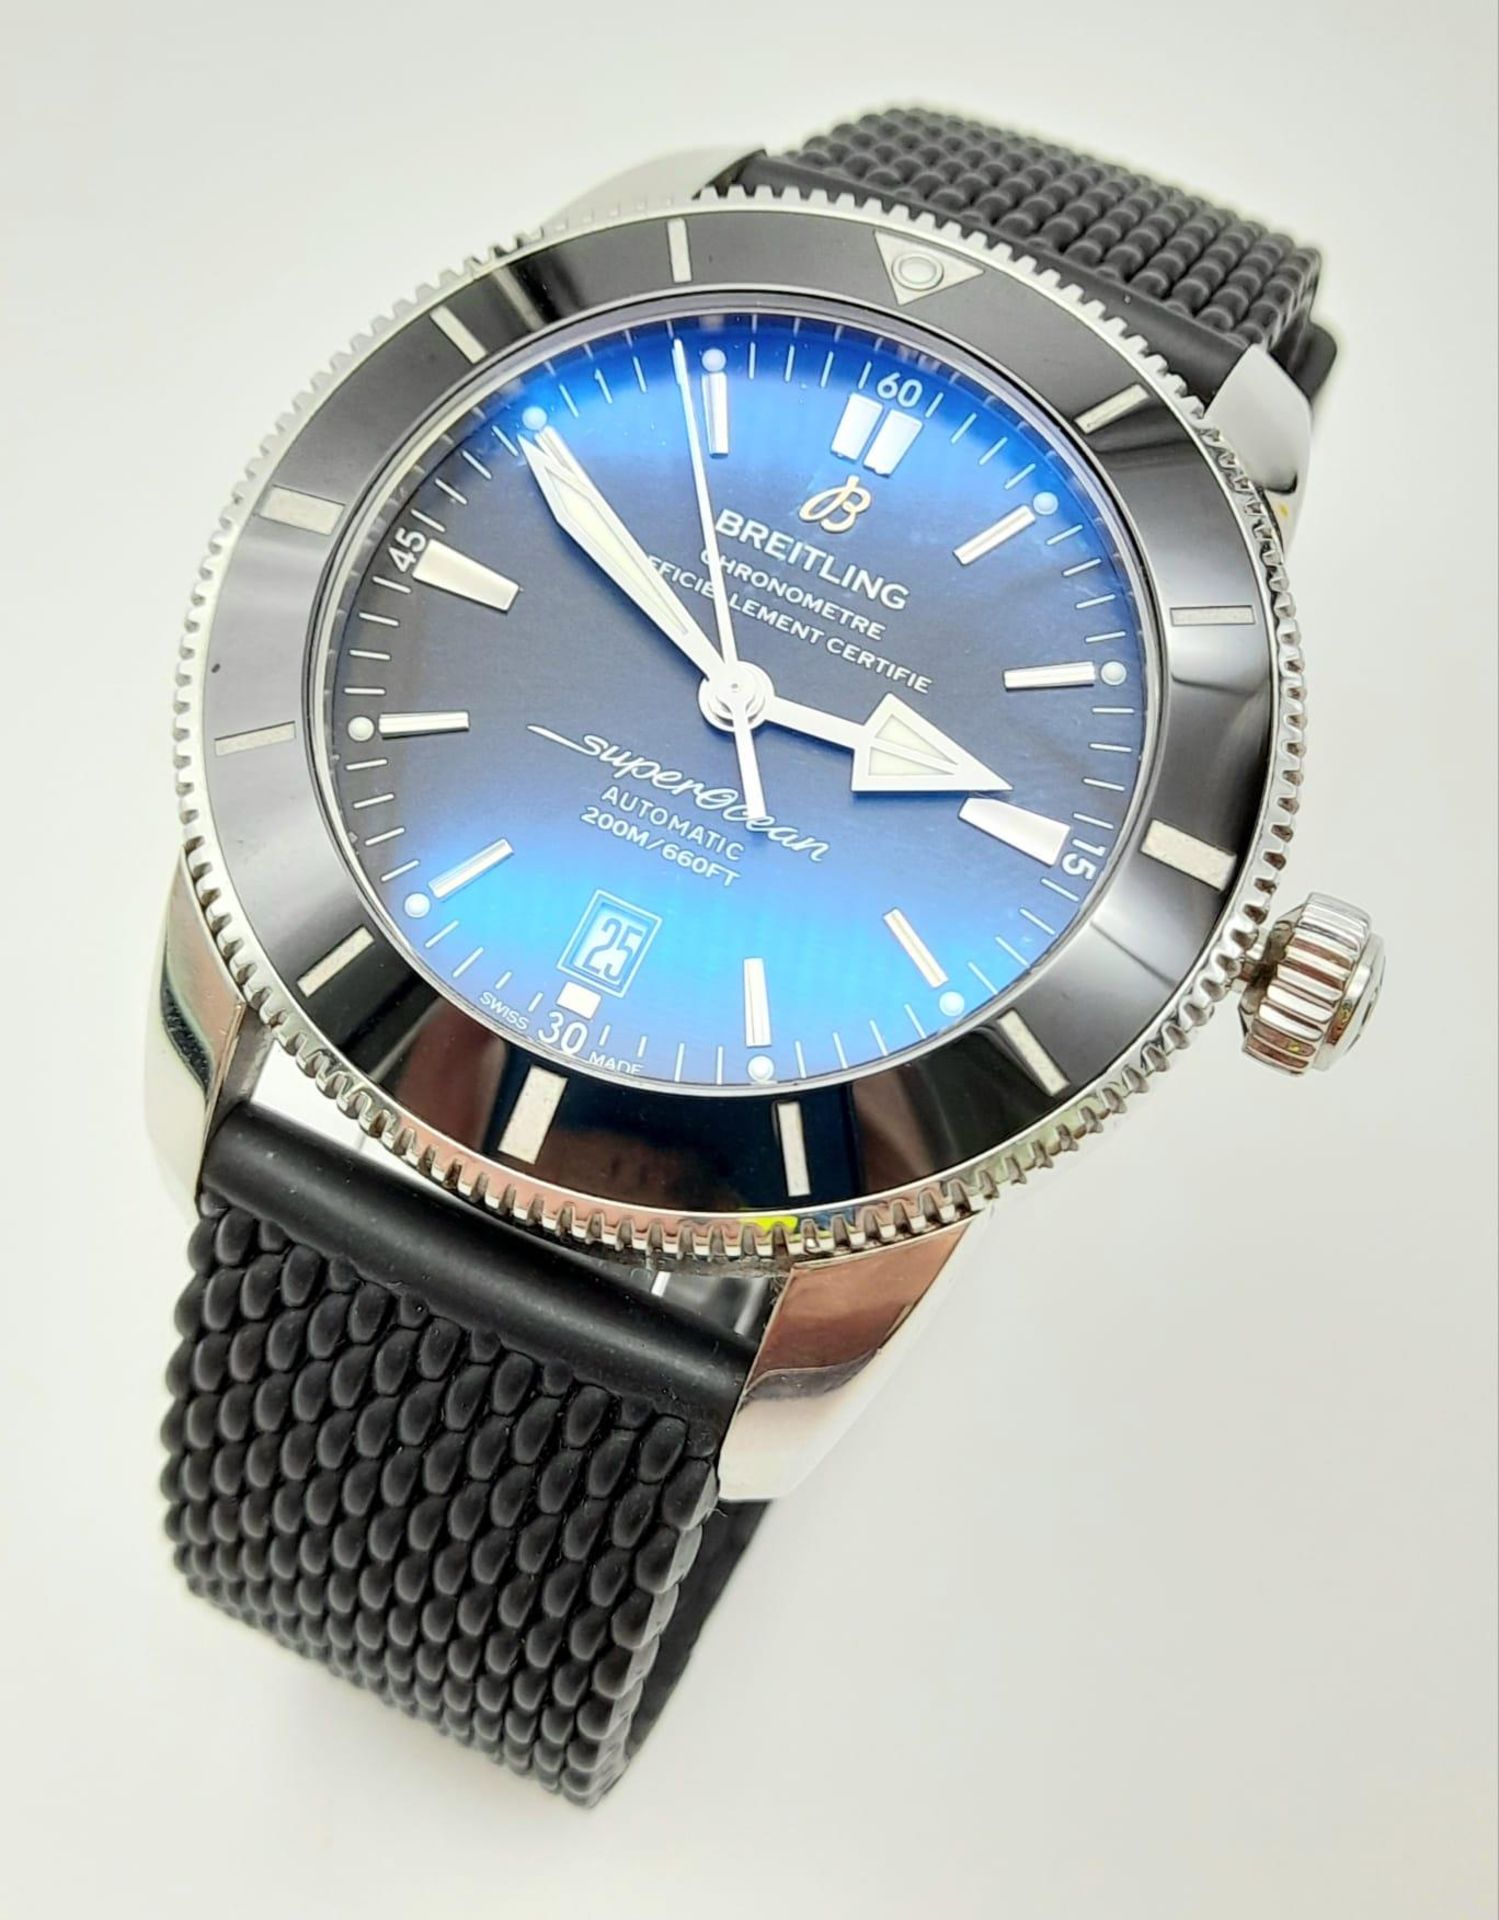 A BREITLING "SUPER-OCEAN" AUTOMATIC CHRONOMETER WITH BOX AND PAPERS IN EXCELLENT CONDITION. 45mm